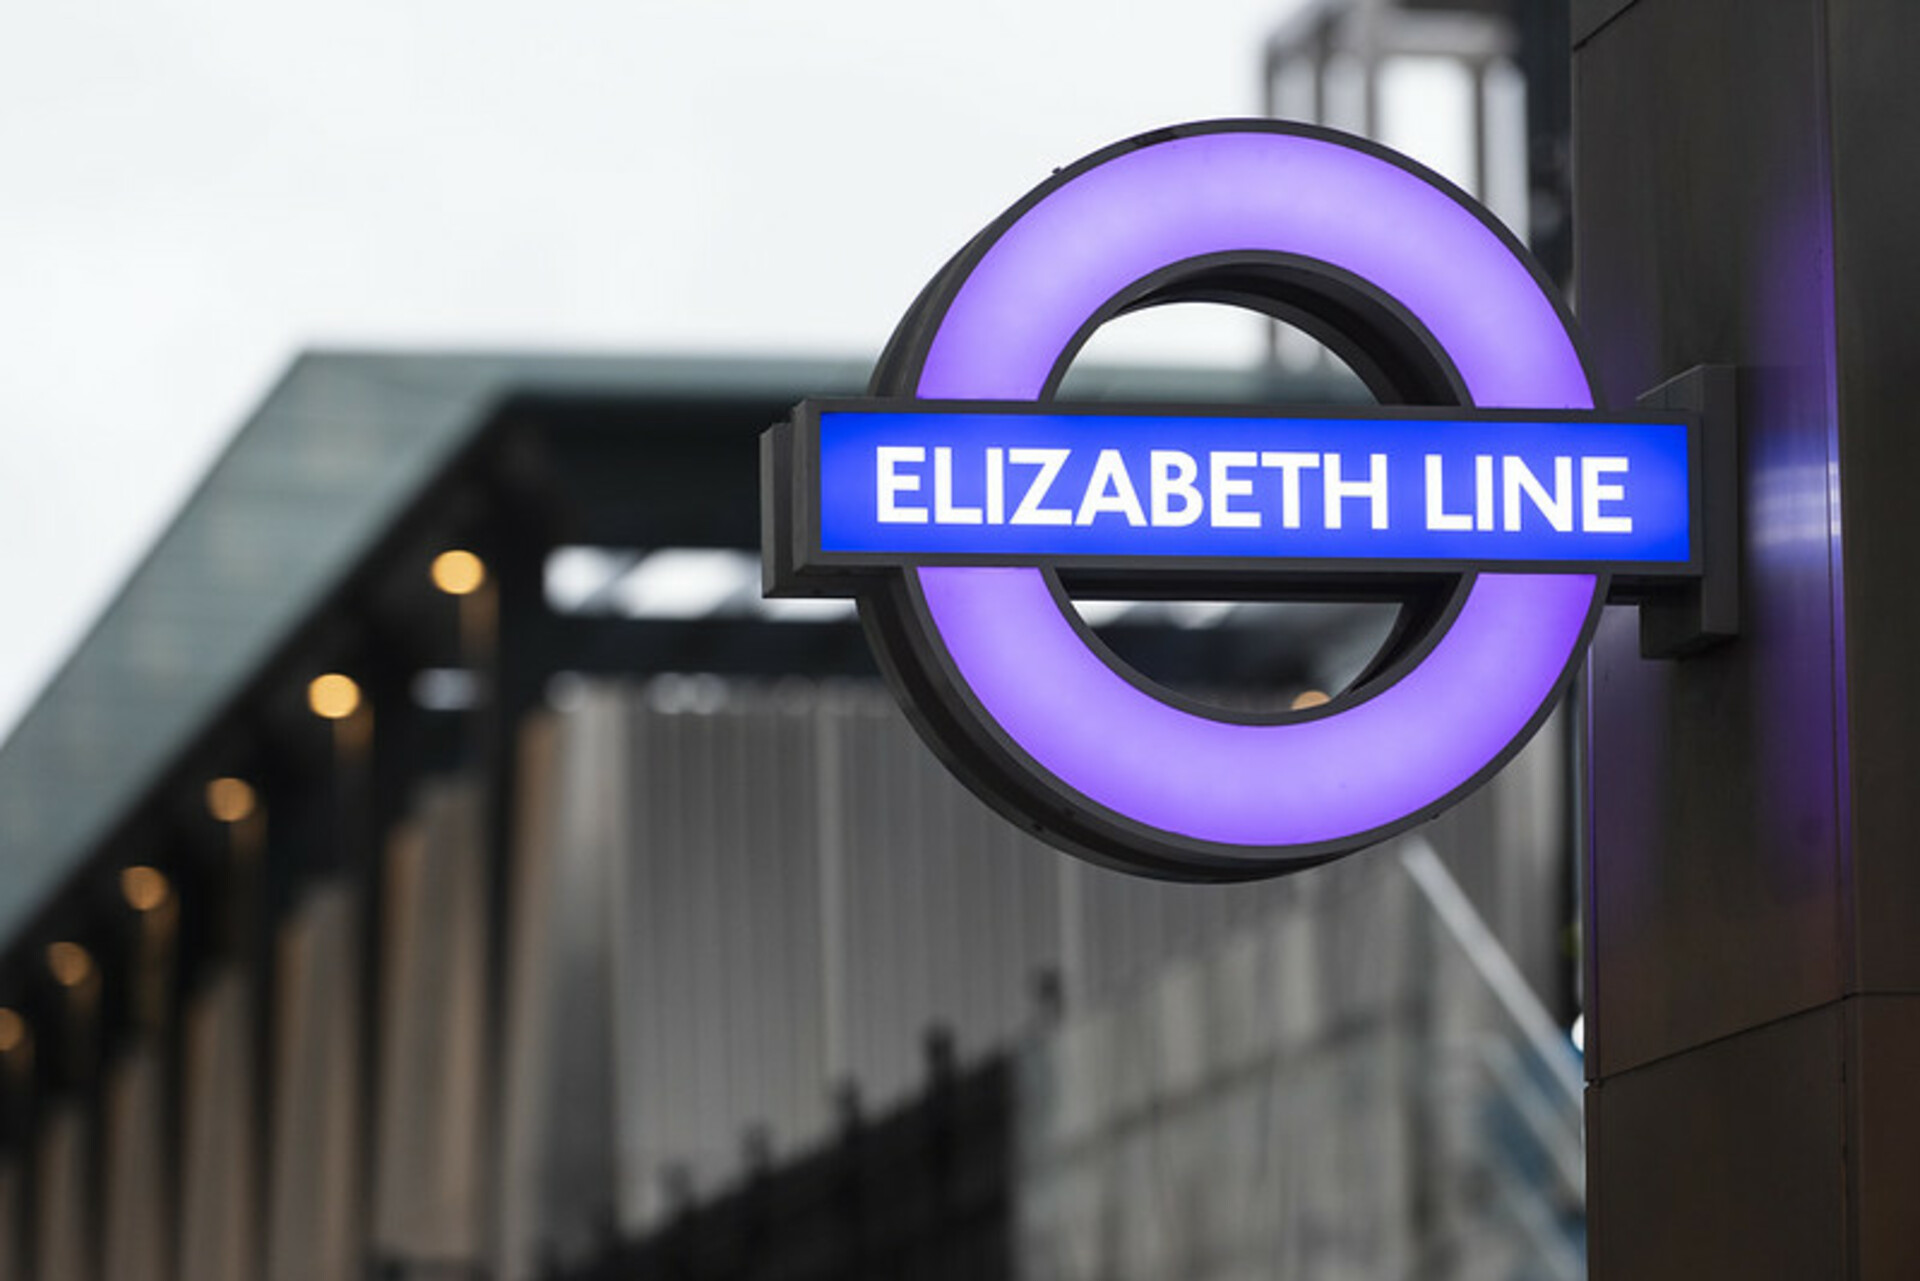 From cables to cloud: How IT changed while building the Elizabeth Line